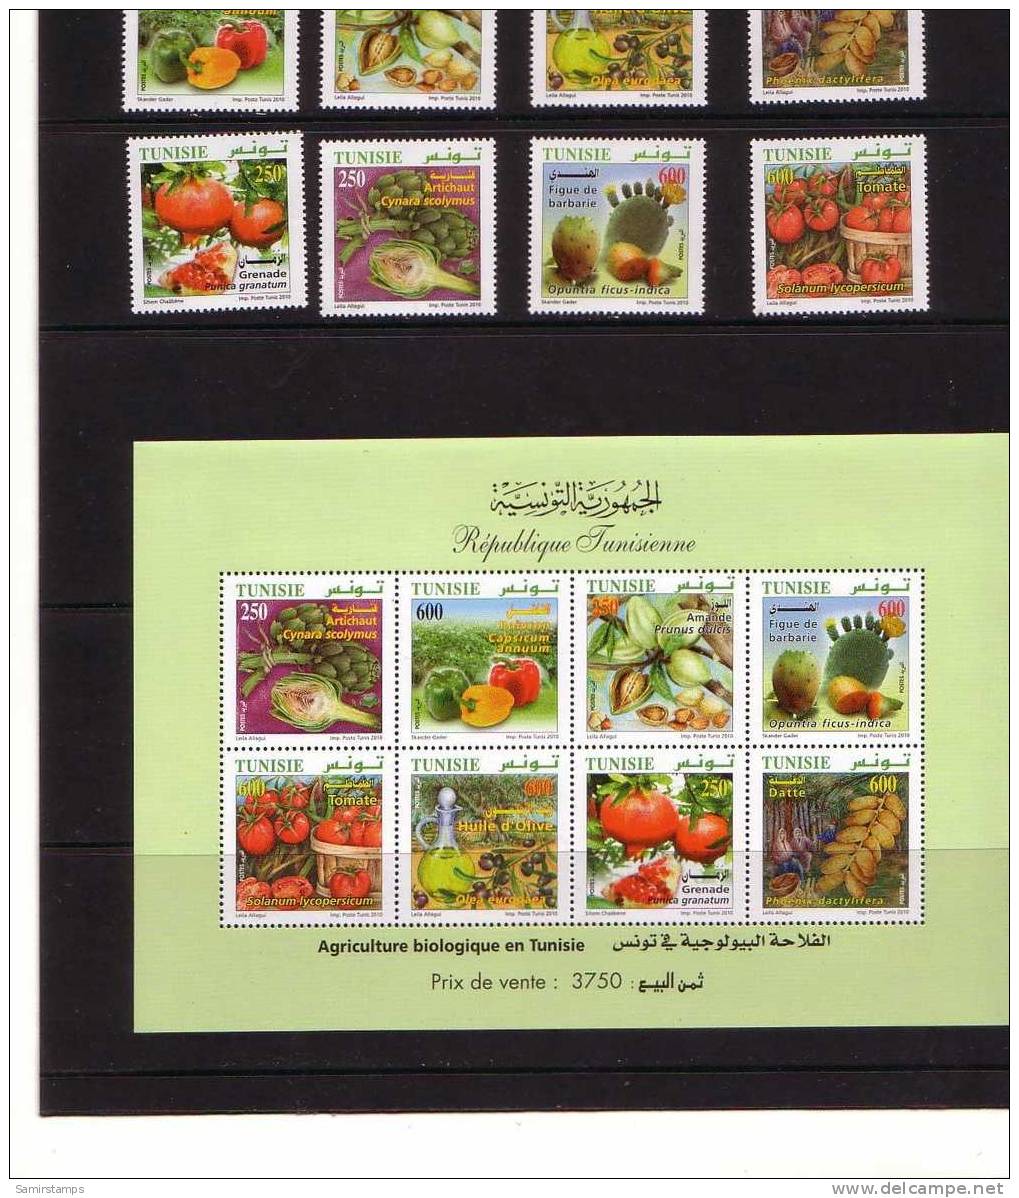 Tunisia New Issue 2010,Bio Agriculture(Vegetables And Fruits ) 8 Stamps + 1 S. Sheet- Nice Topical-MNH-SKRILL PAY - Tunisia